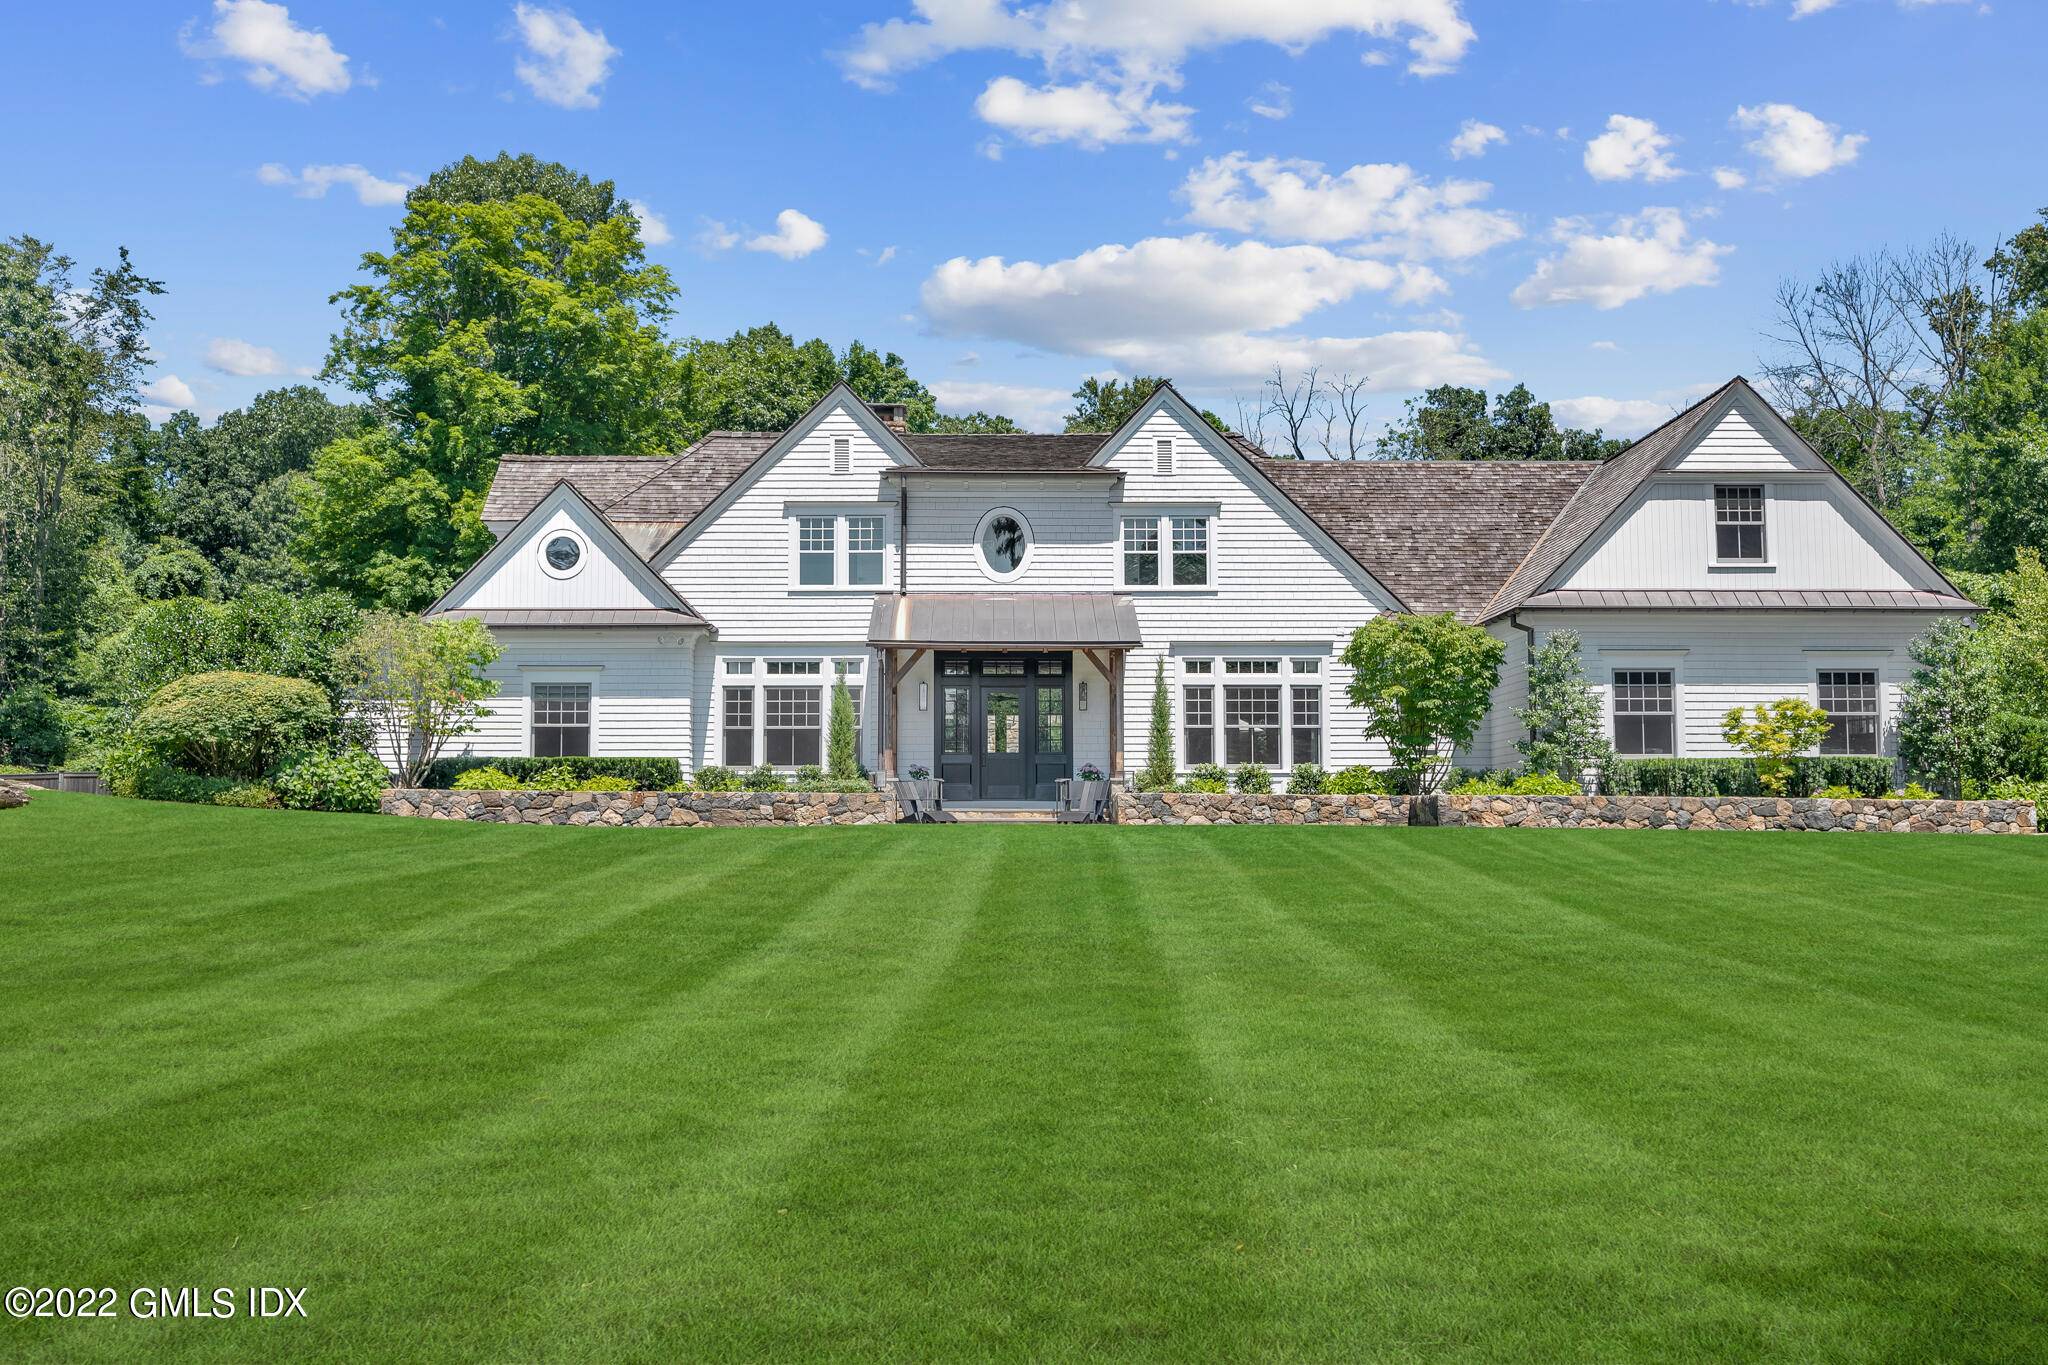 Stunning renovation combines classic farmhouse features with modern chic sophistication.